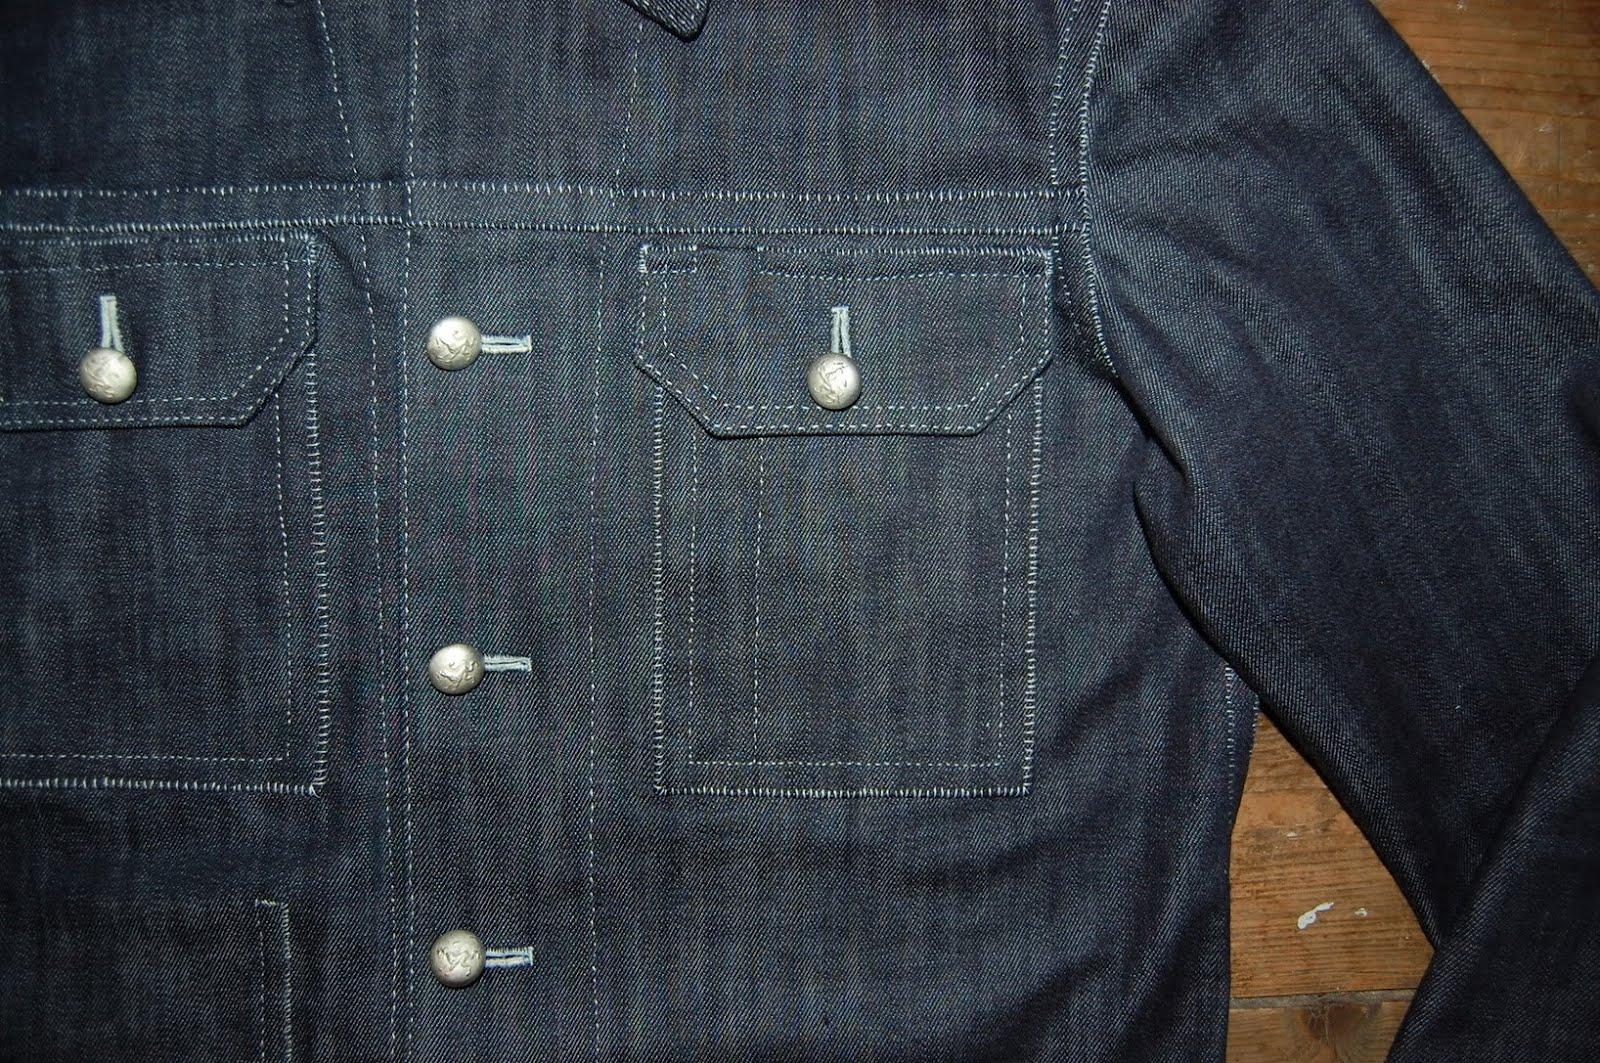 COMPLETELY HAND-STICHED SELVEDGE DENIM JACKET